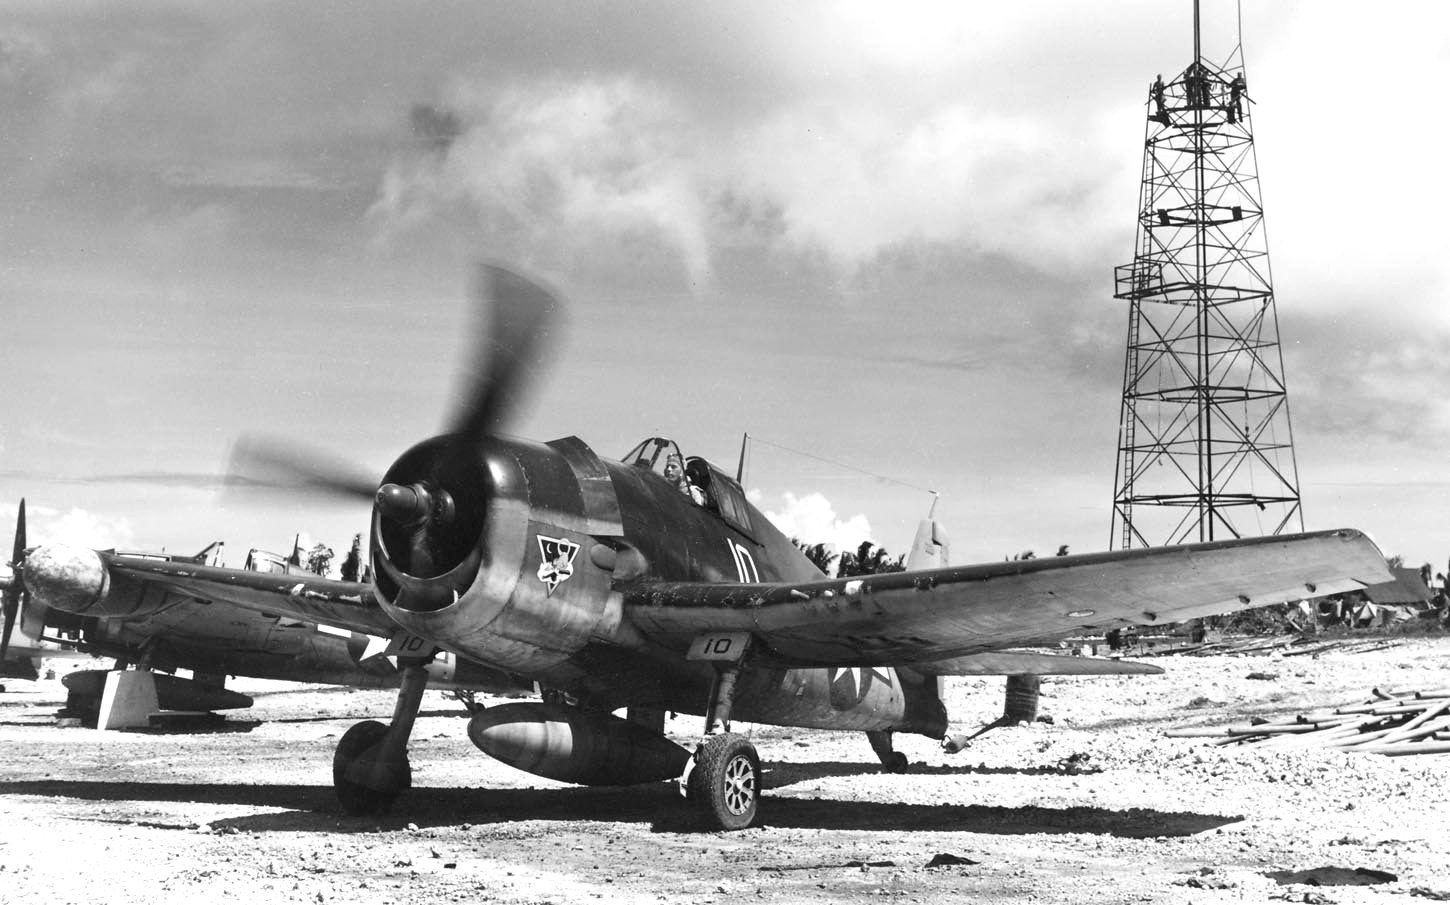 F6F-3N Hellcat night fighter of Marine Night Fighter Squadron 534 running up its engine at Orote airfield, Guam, Marianas, Aug 21 1944. Note radome on left wing.